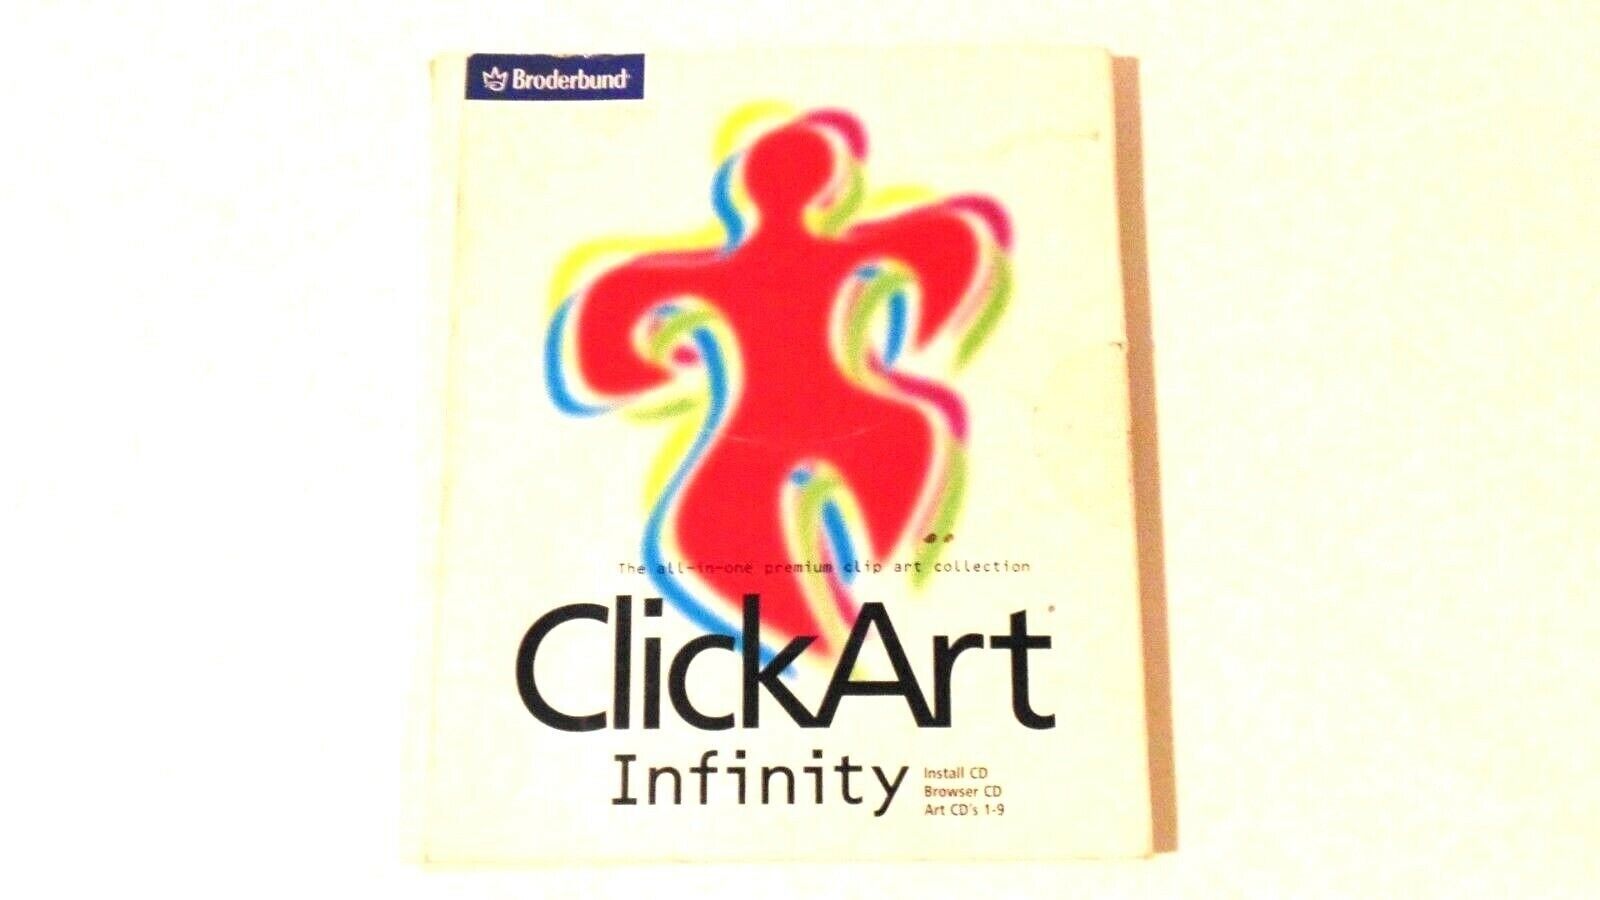 Clickart Click Art Infinity 9 CD Pack All In One Premium Collection Broderbund